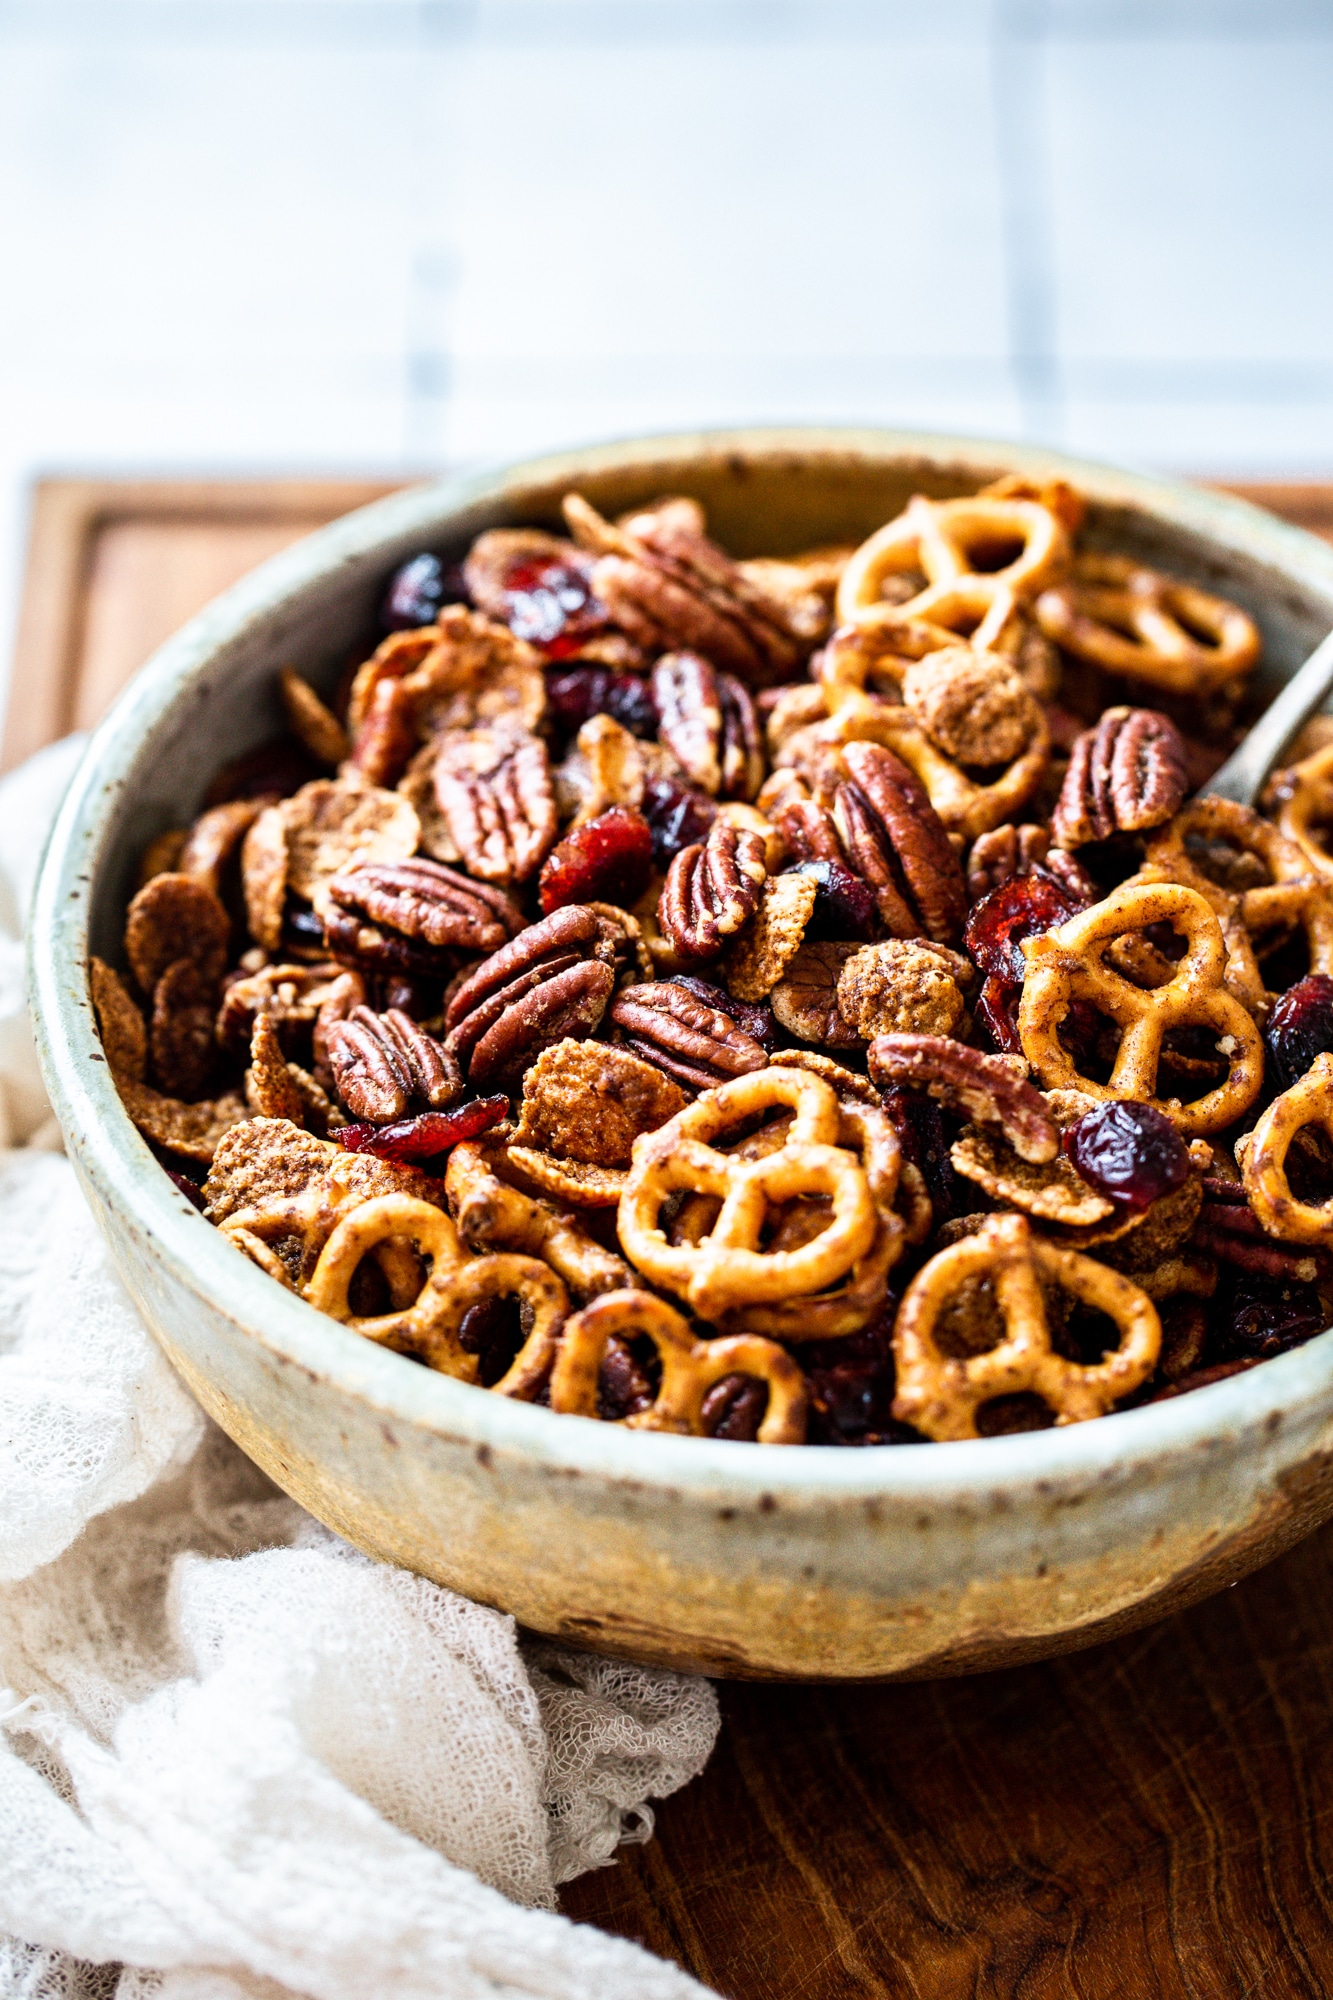 This Healthy Pumpkin Spice Snack Mix is crunchy, sweet, and SO easy to make with just seven ingredients! It's perfect for snacking on, using as a crunchy topping, or giving as a gift.